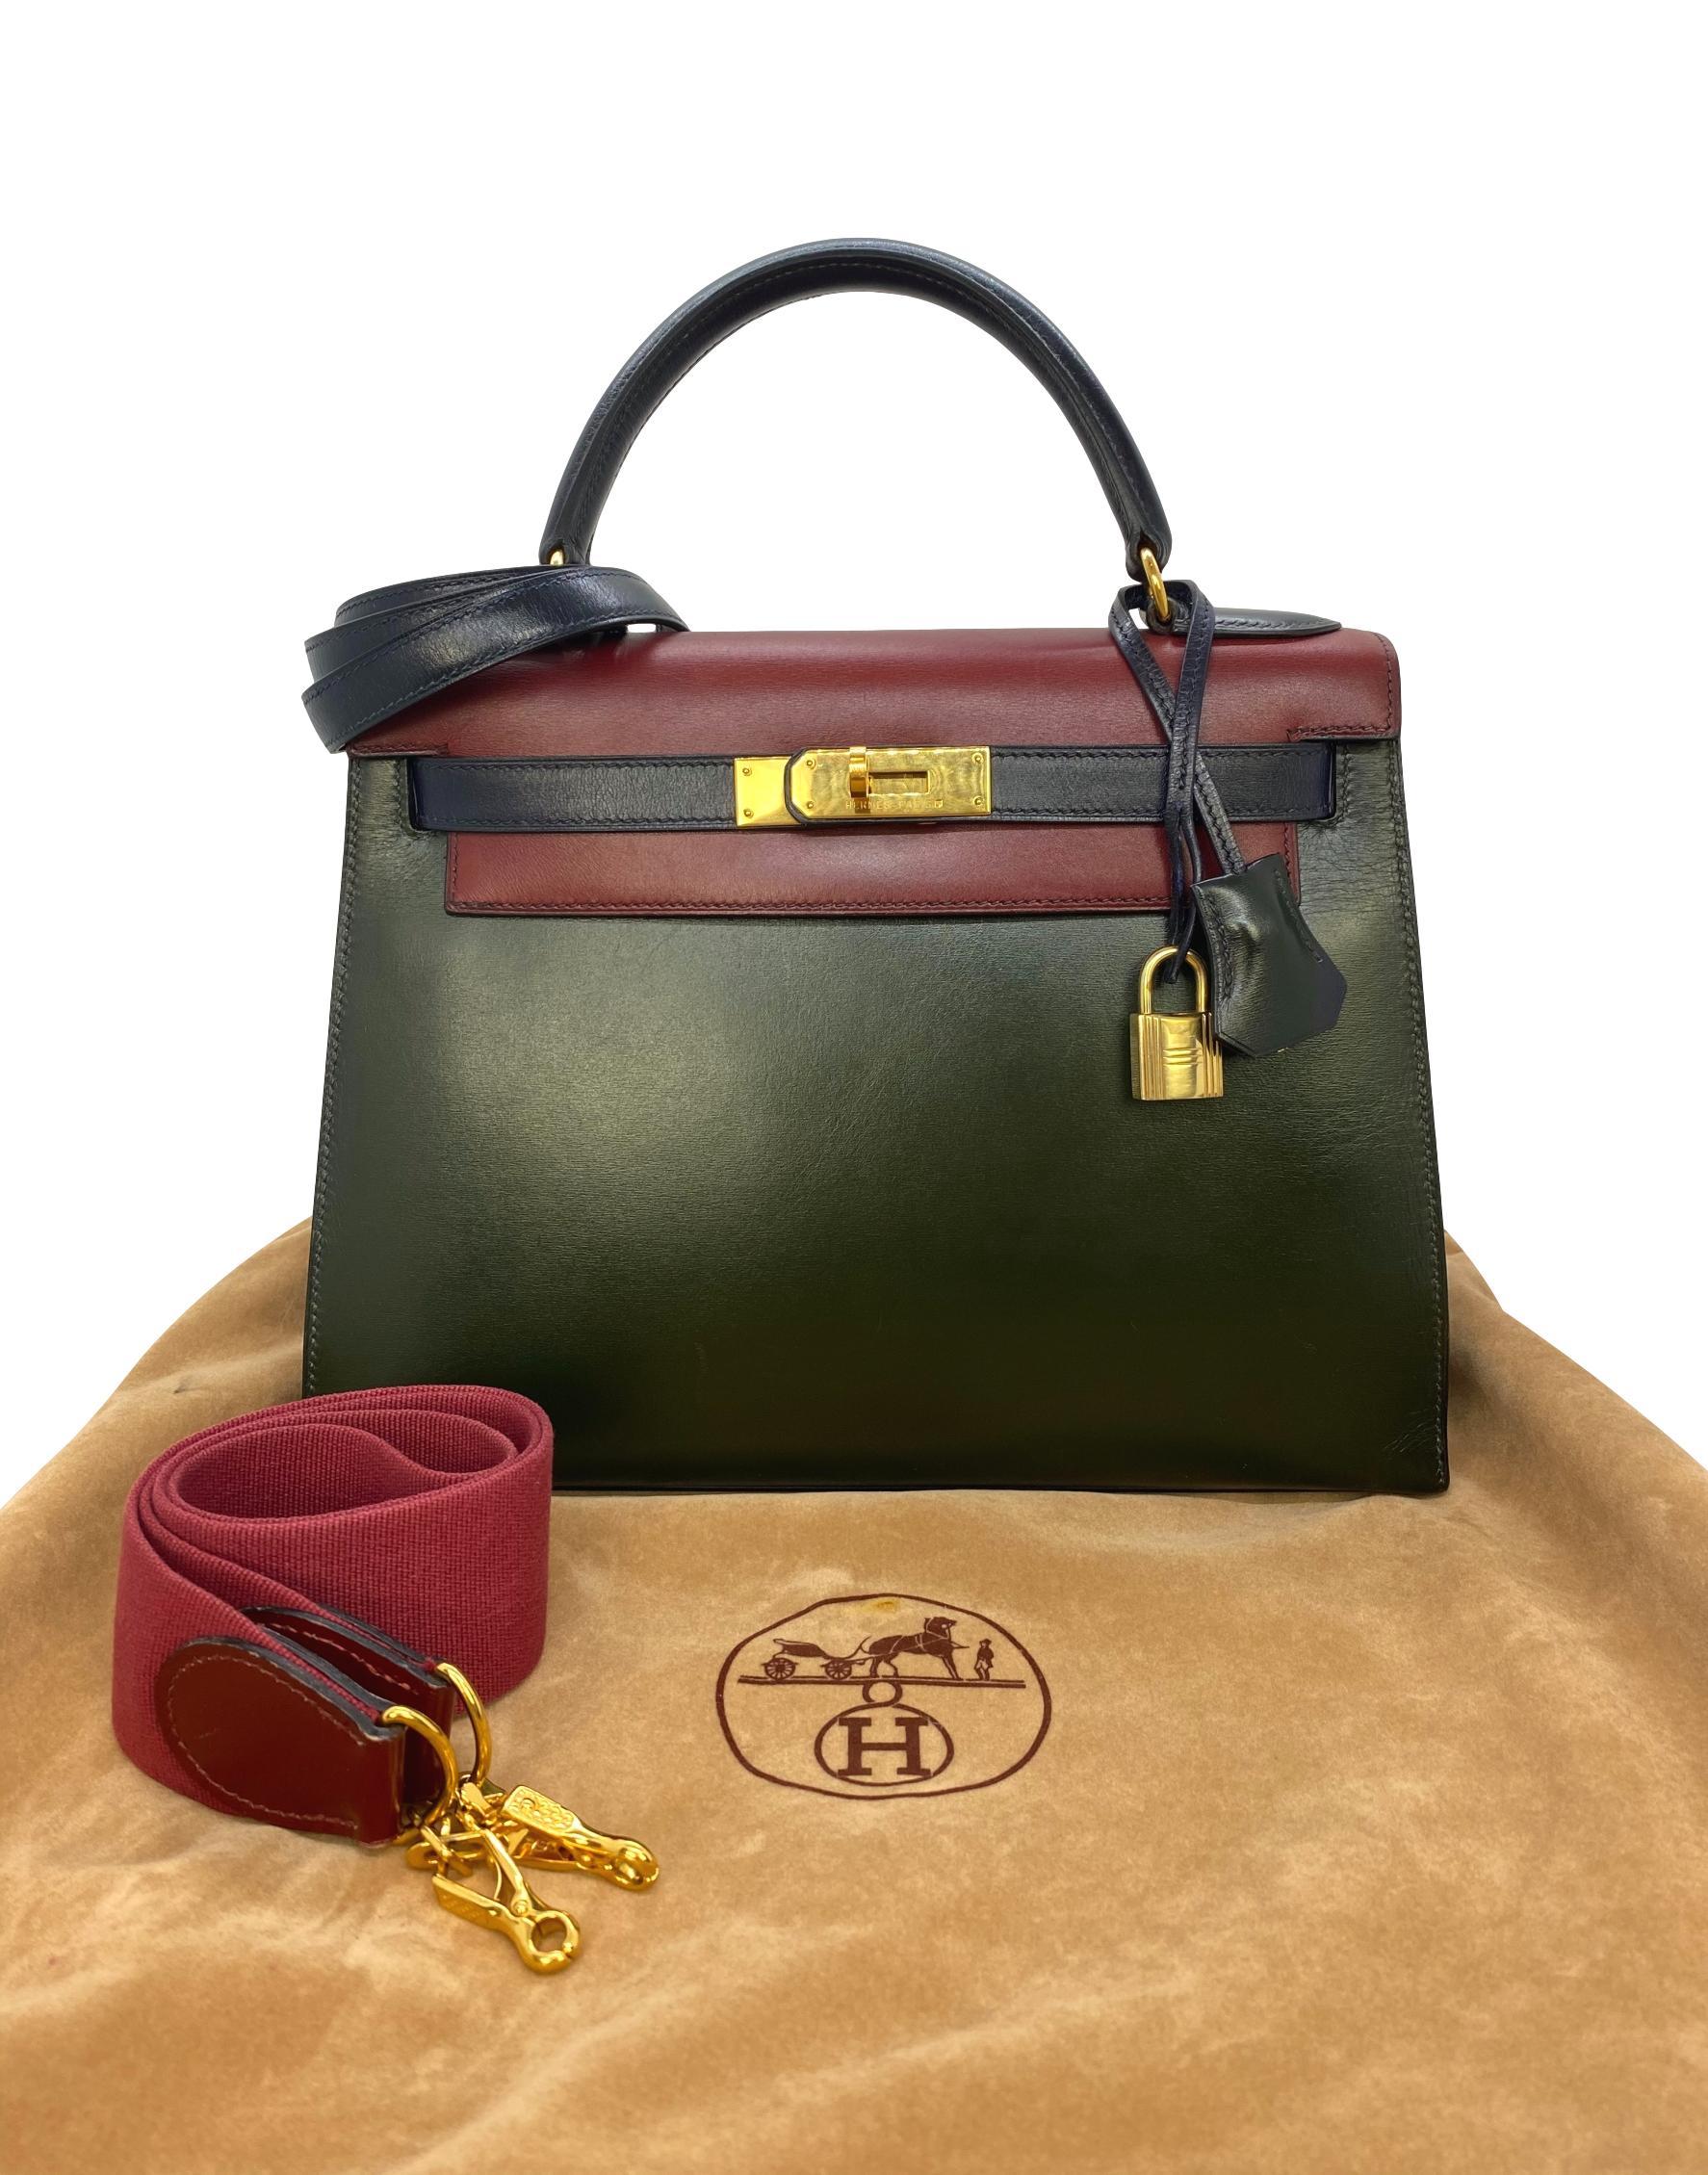 Hermès Limited Edition Vintage Tri-Color Vert Fonce, Rouge H & Indigo Box Calf Kelly Bag with Gold Hardware 28, 1993. Originally introduced in the early 1930's as the Sac à dépêches bag, the Kelly became world renowned after Grace Kelly, Princess